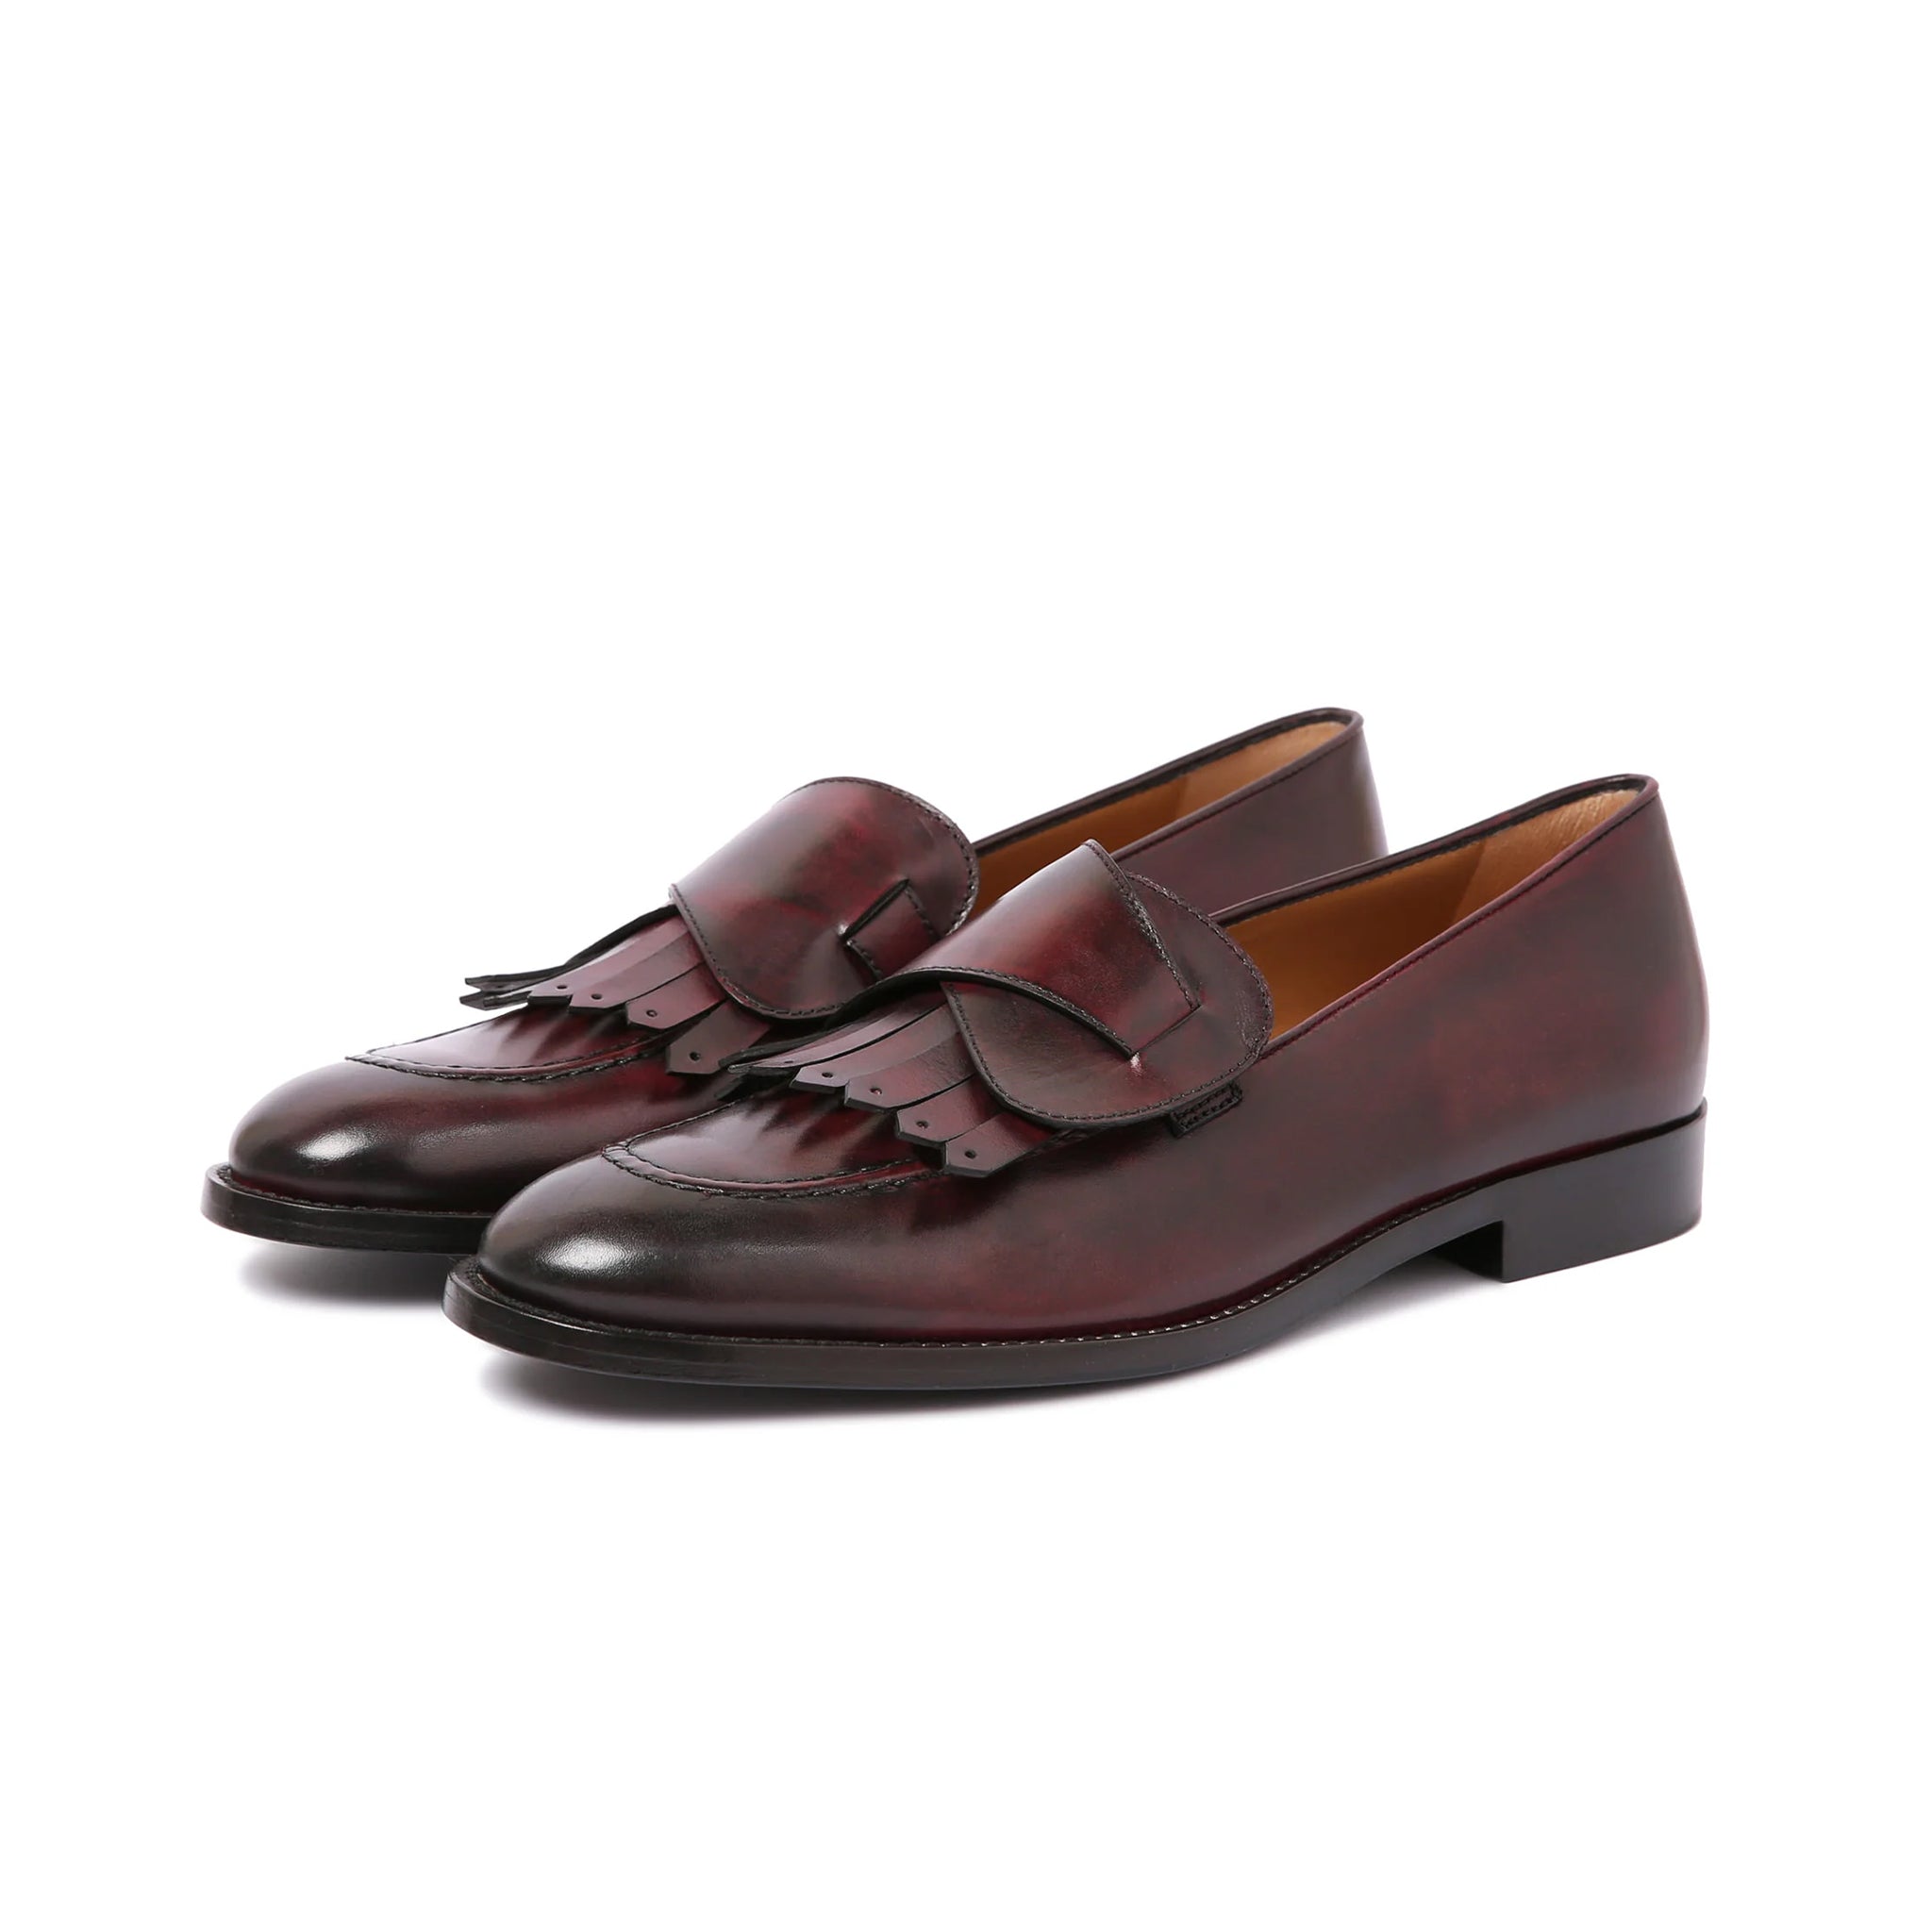 Weaved Leather Loafers for Men's